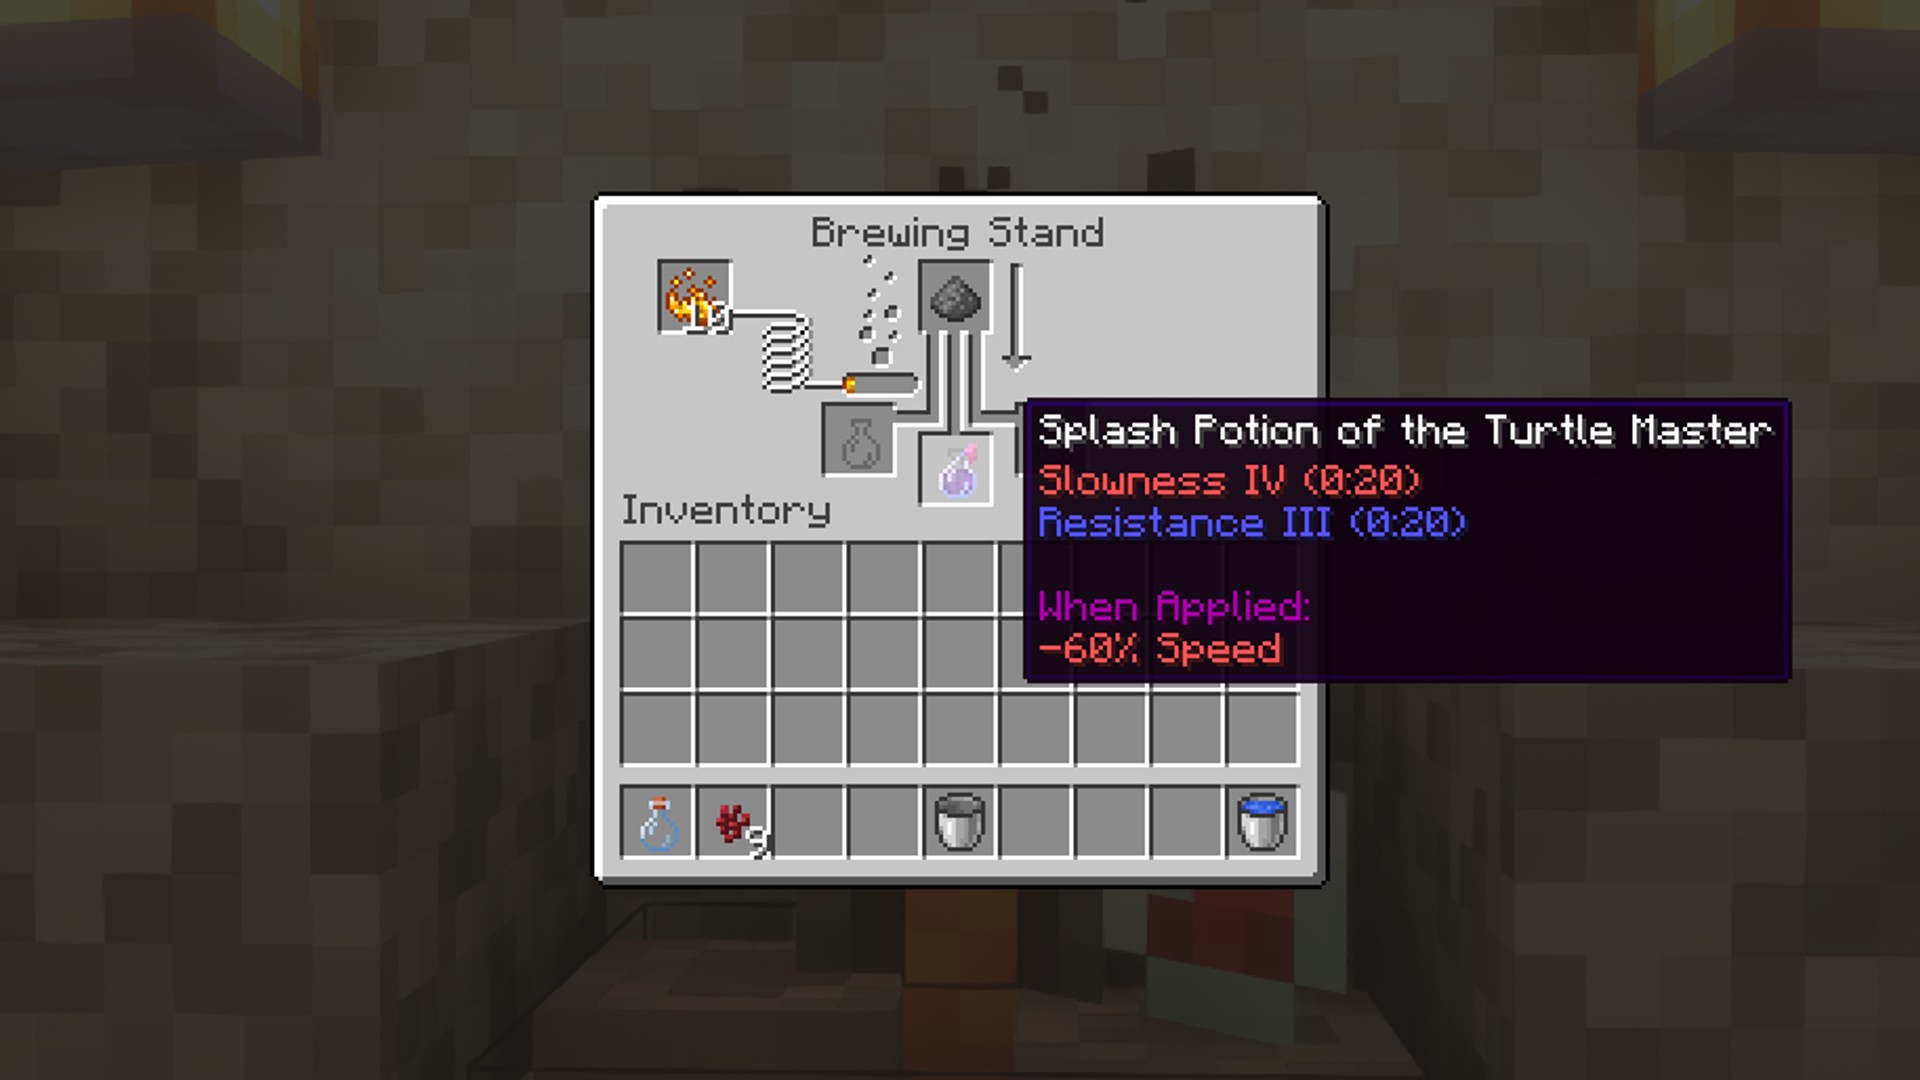 Minecraft potions recipes and brewing guide: Enhanced Minecraft potions recipe - the healing instant health II potion in a brewing stand.